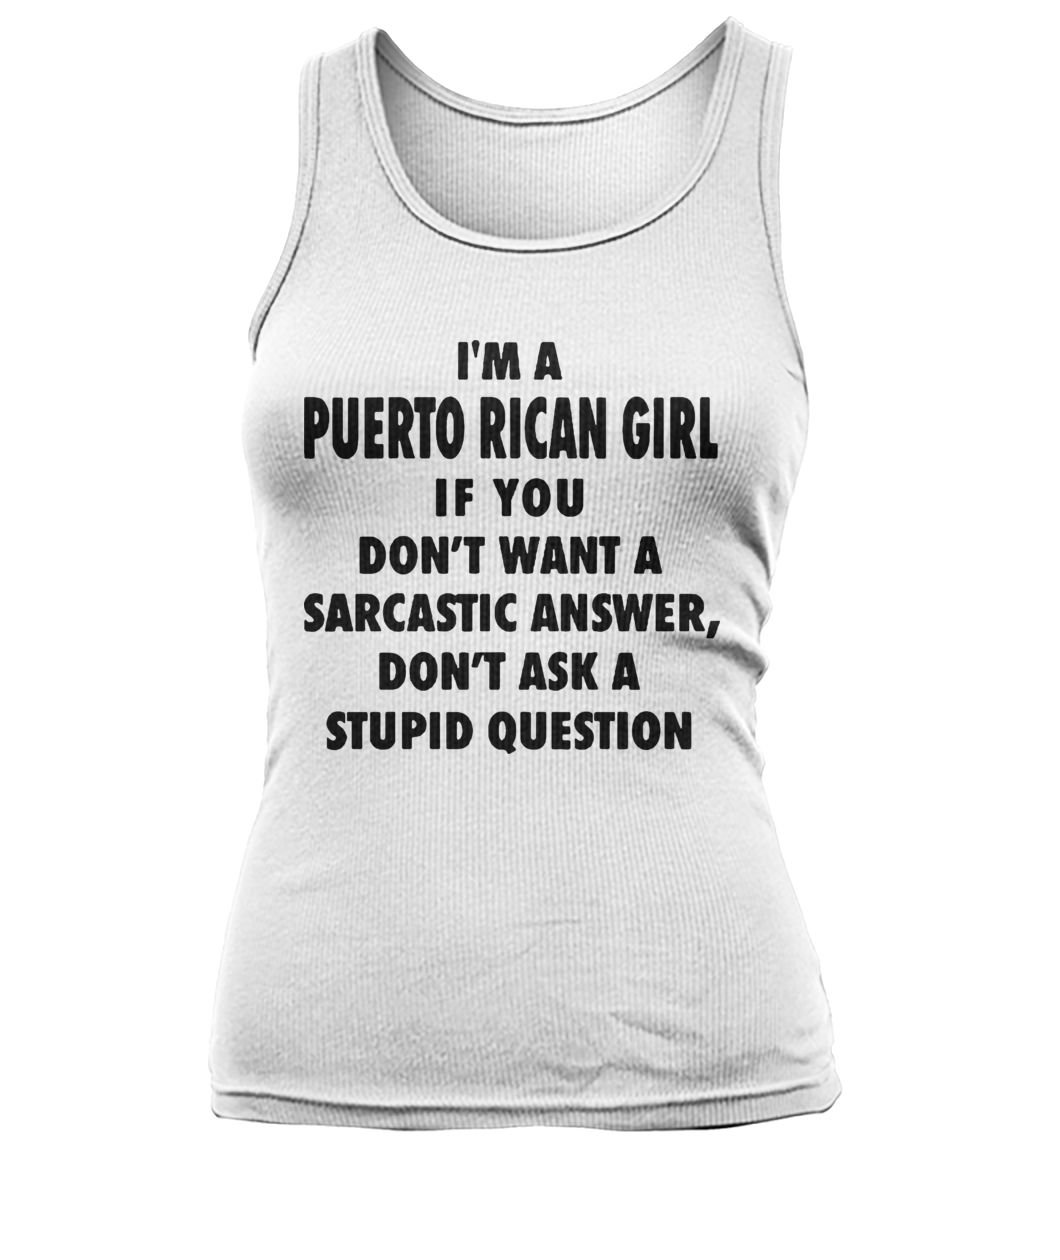 I'm an puerto rican girl if you don't want a sarcastic answer don't ask a stupid question women's tank top